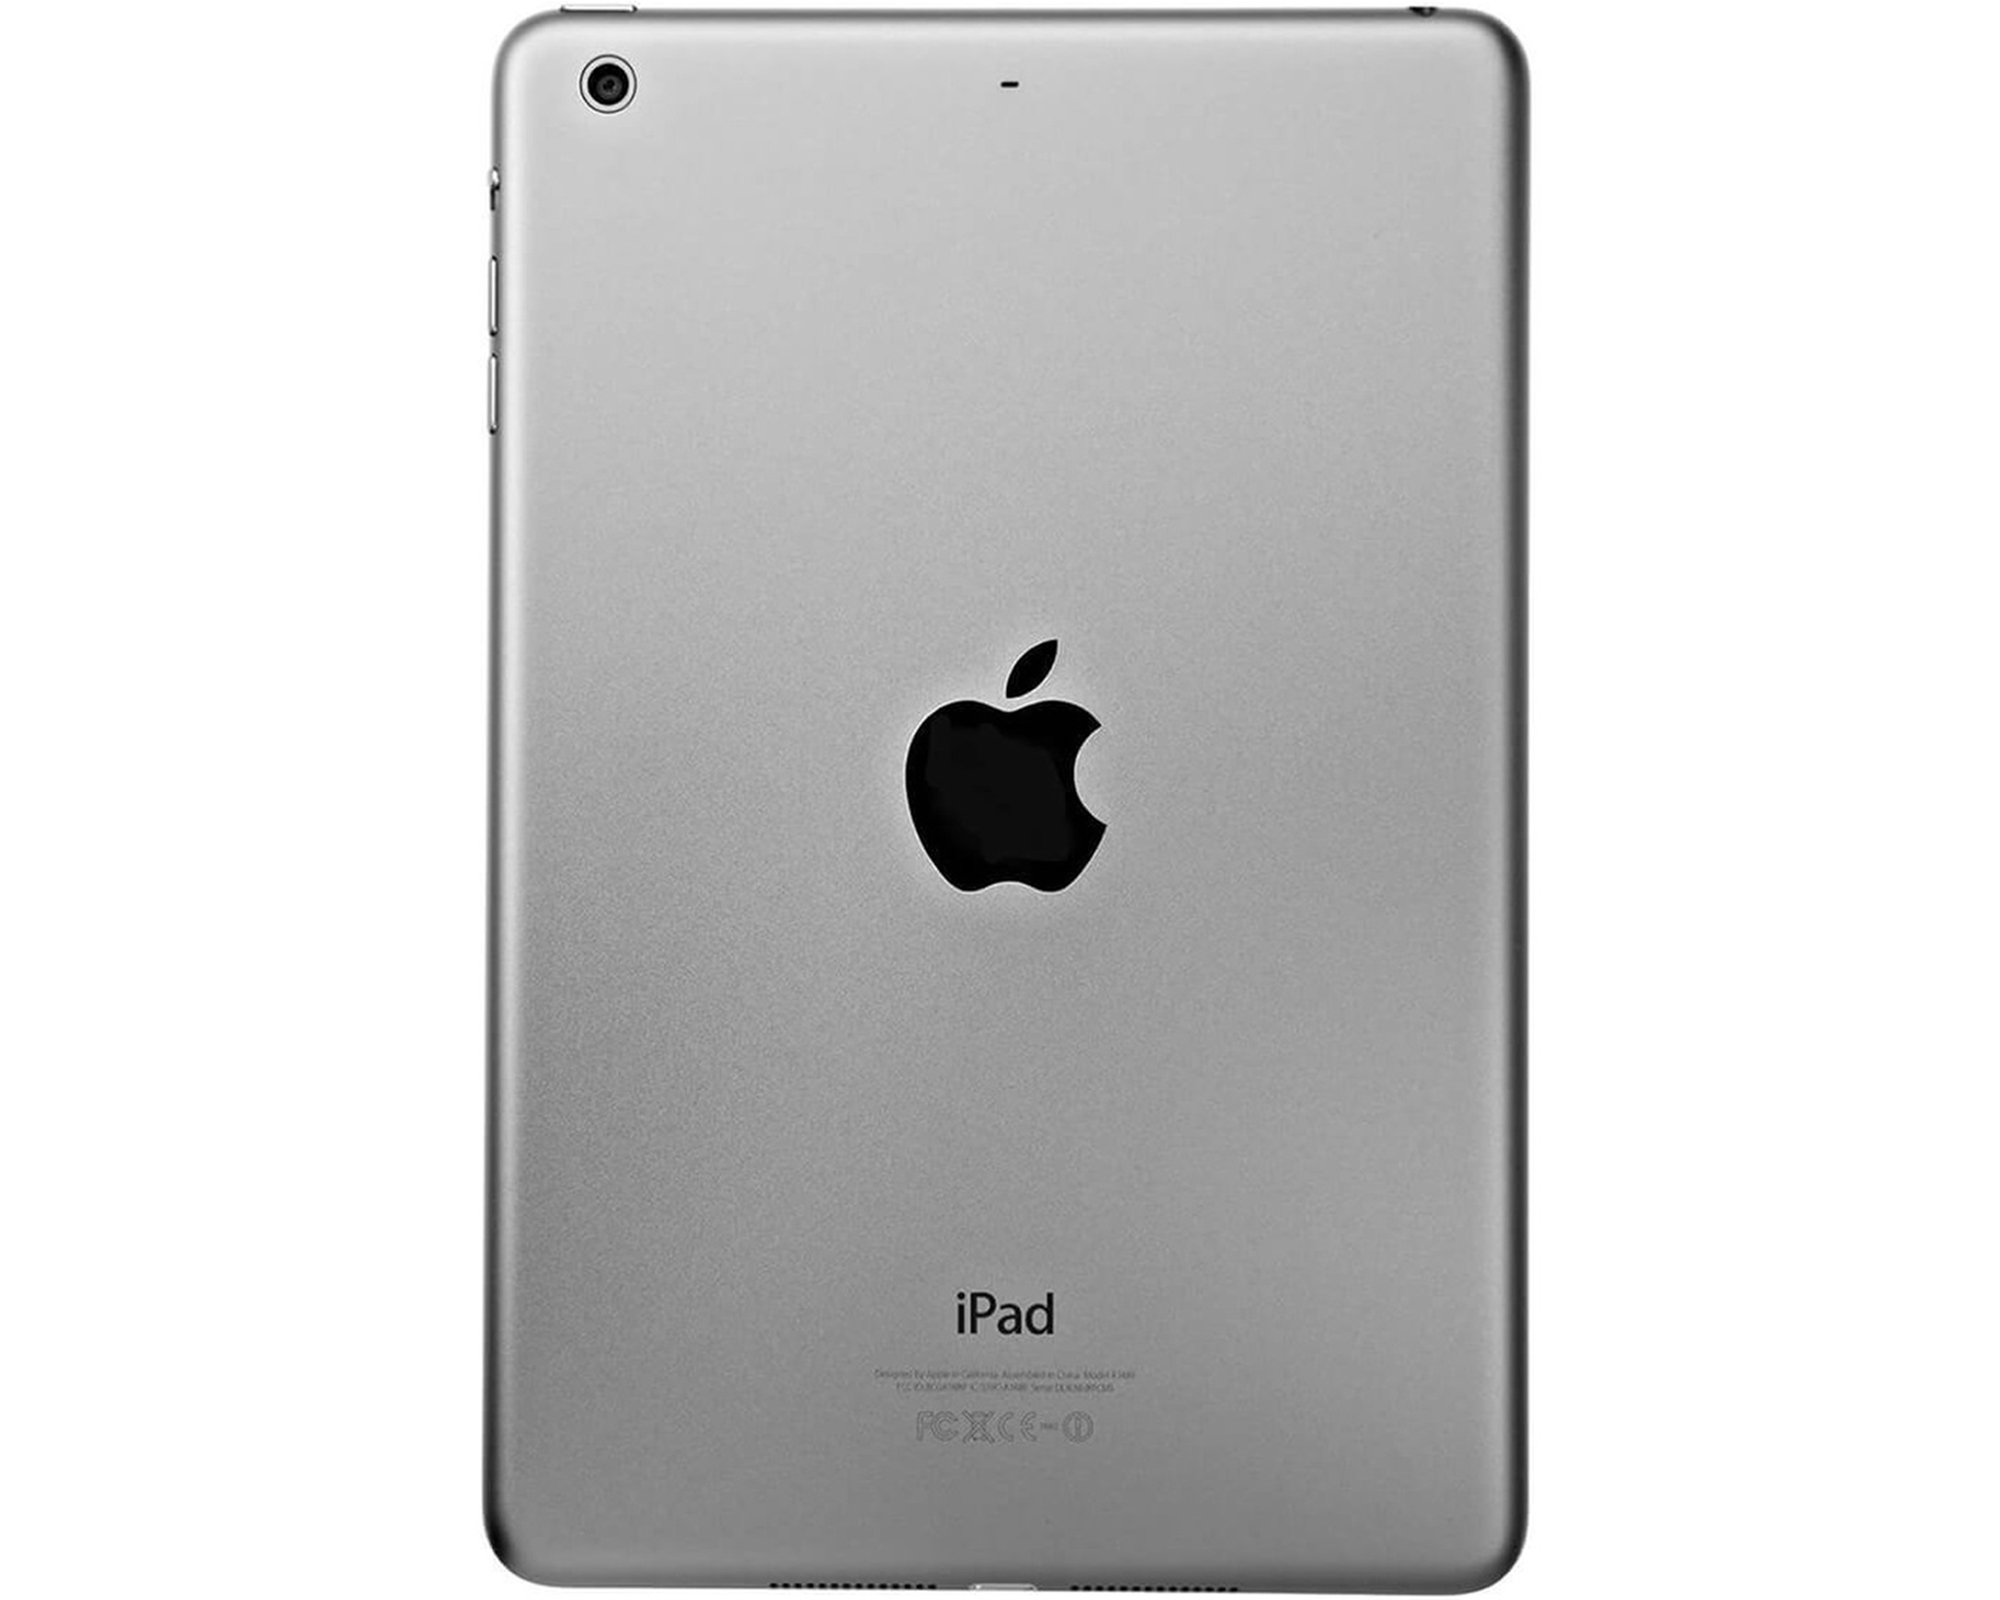 Restored Apple iPad Air 9.7" Retina Display 32GB WiFi Tablet - Space Gray - MD786LL/A (Refurbished) - image 2 of 5